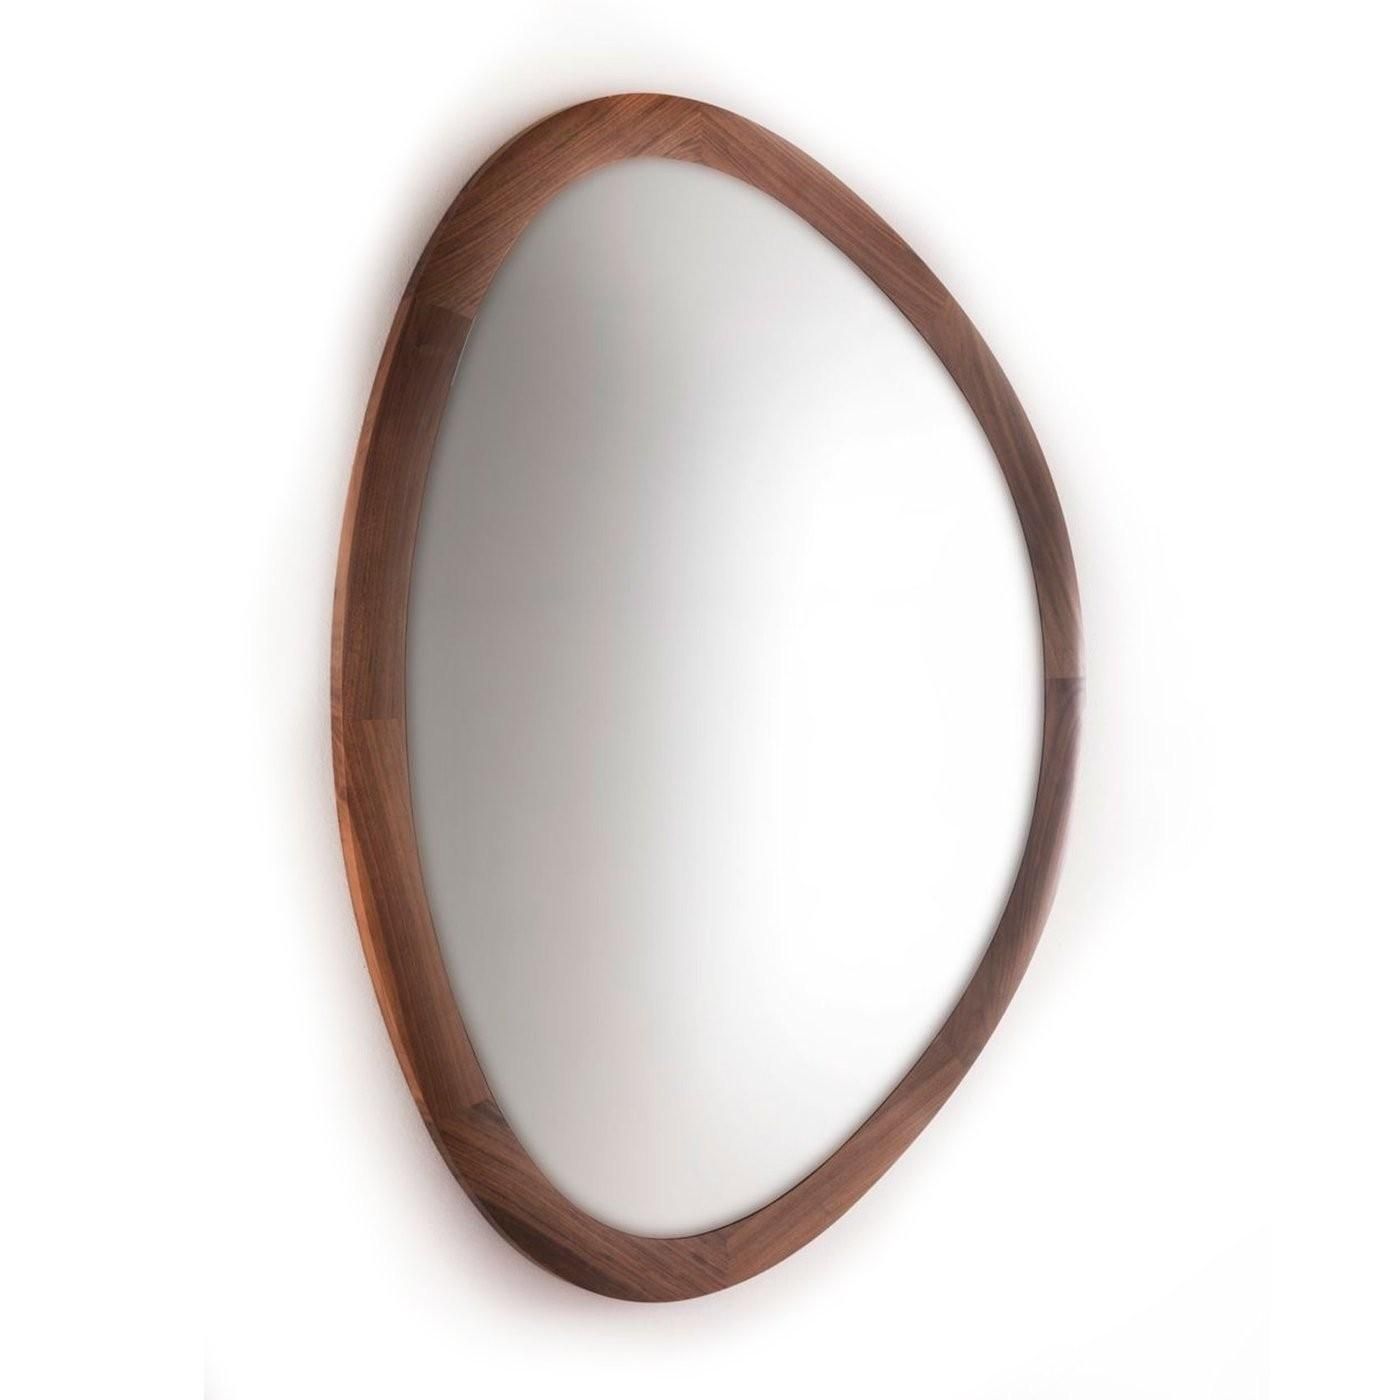 Modern Contemporary Mirrors | Heal's Intended For Silver Oval Wall Mirror (View 18 of 20)